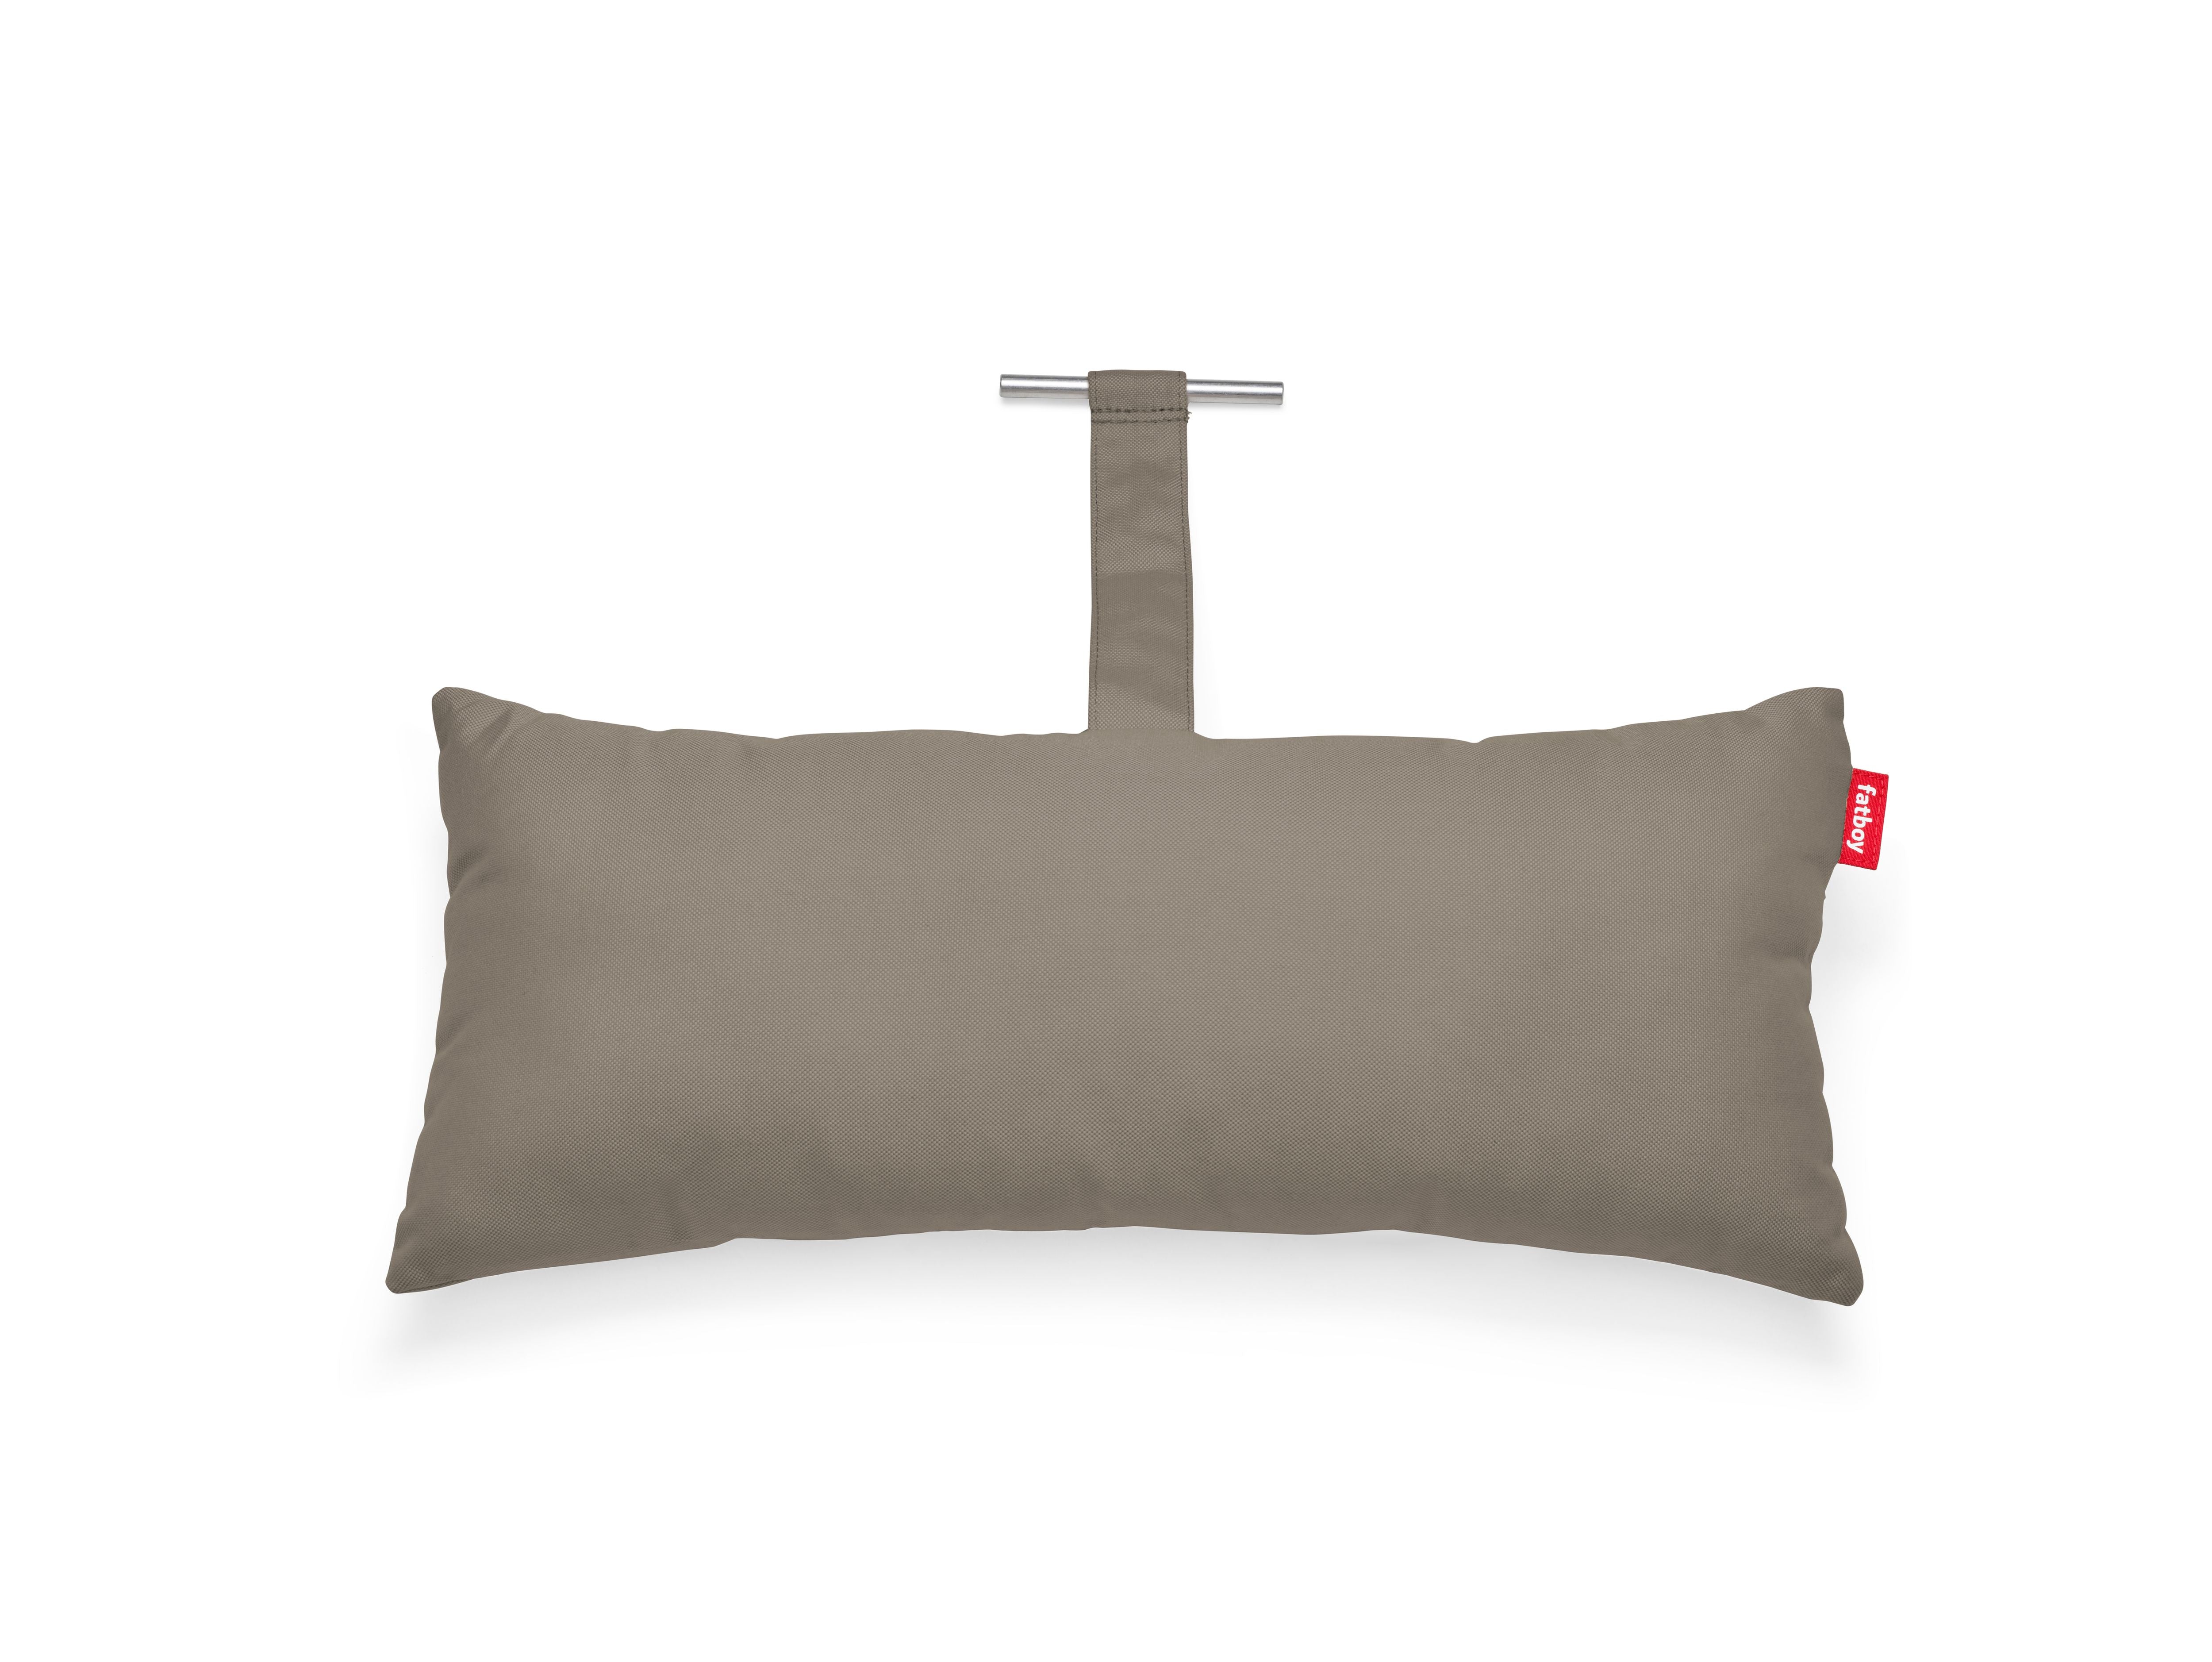 Fatboy Headdeck Hammock Deluxe, taupe / gris clair